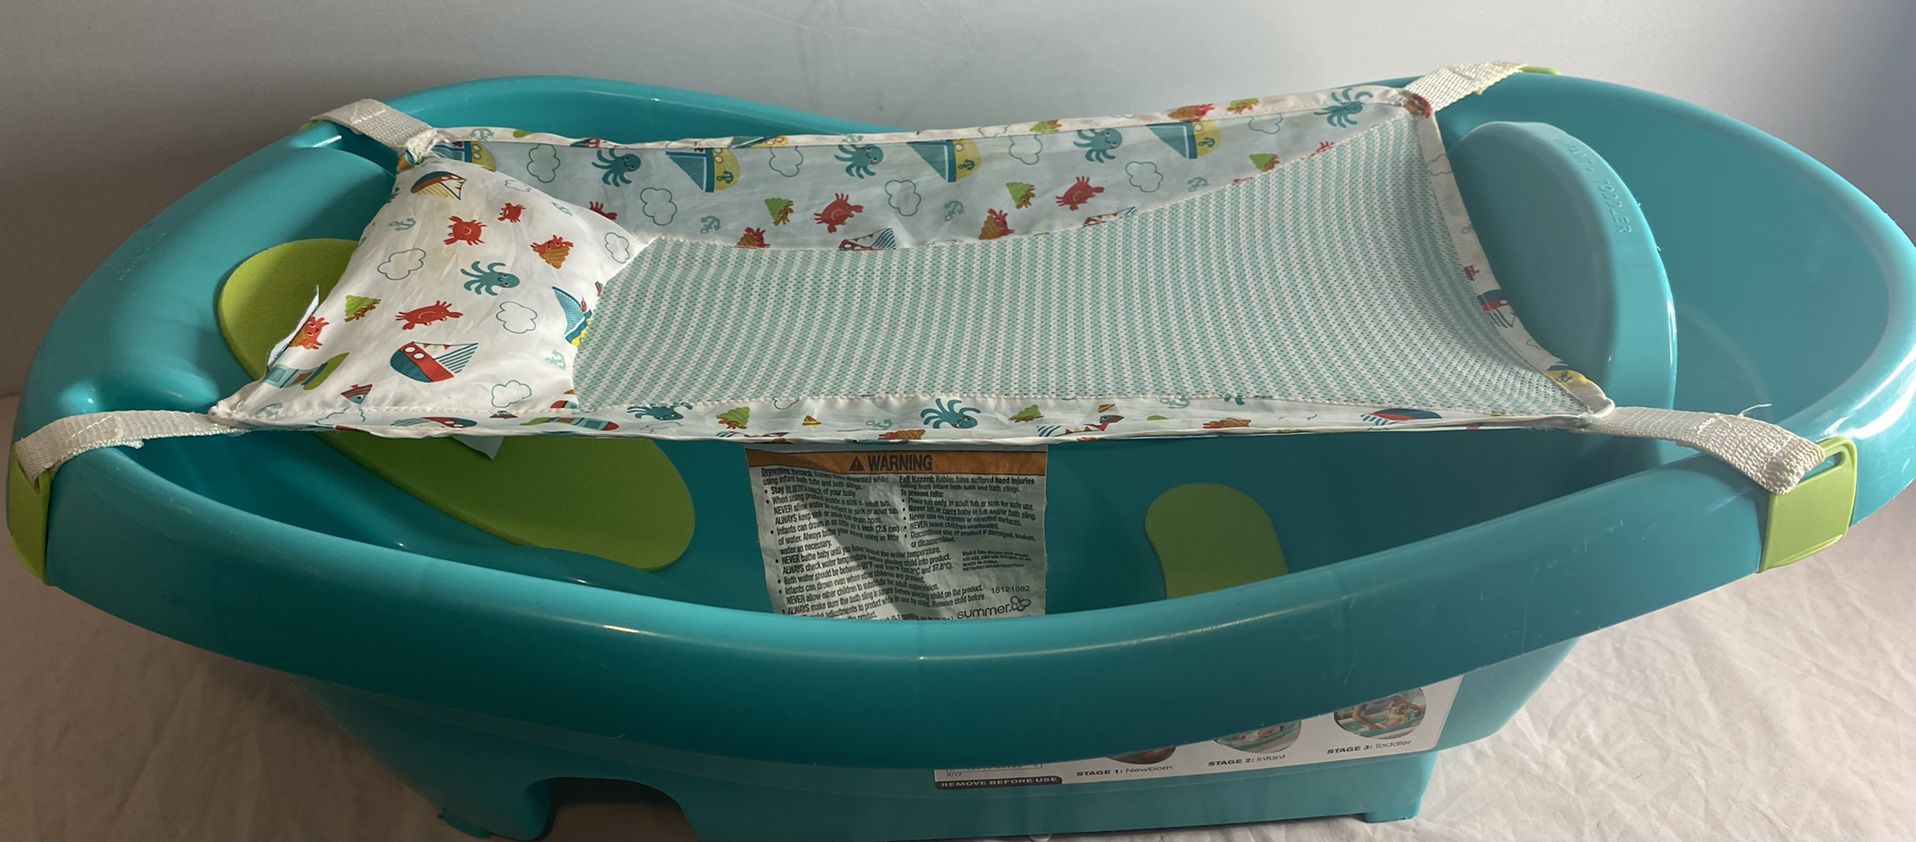 Summer Comfy Clean  Deluxe  Newborn  to Toddler Tub (Teal)